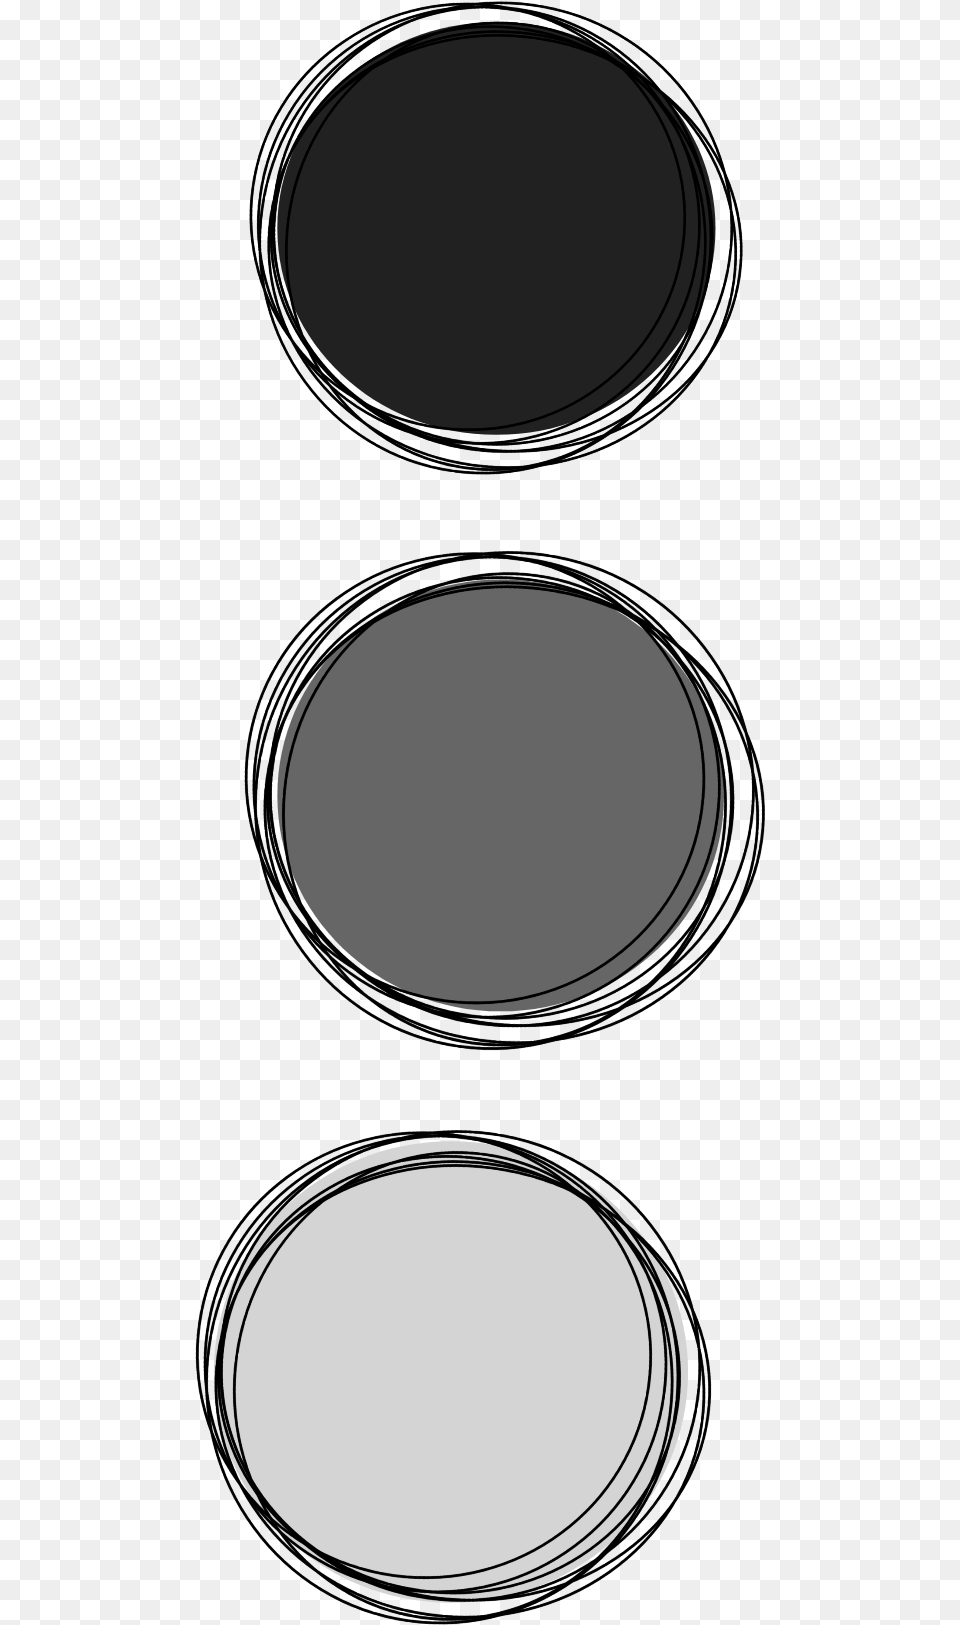 Circle Circles Aesthetic Sticker By White And Black Aesthetics, Oval Free Transparent Png